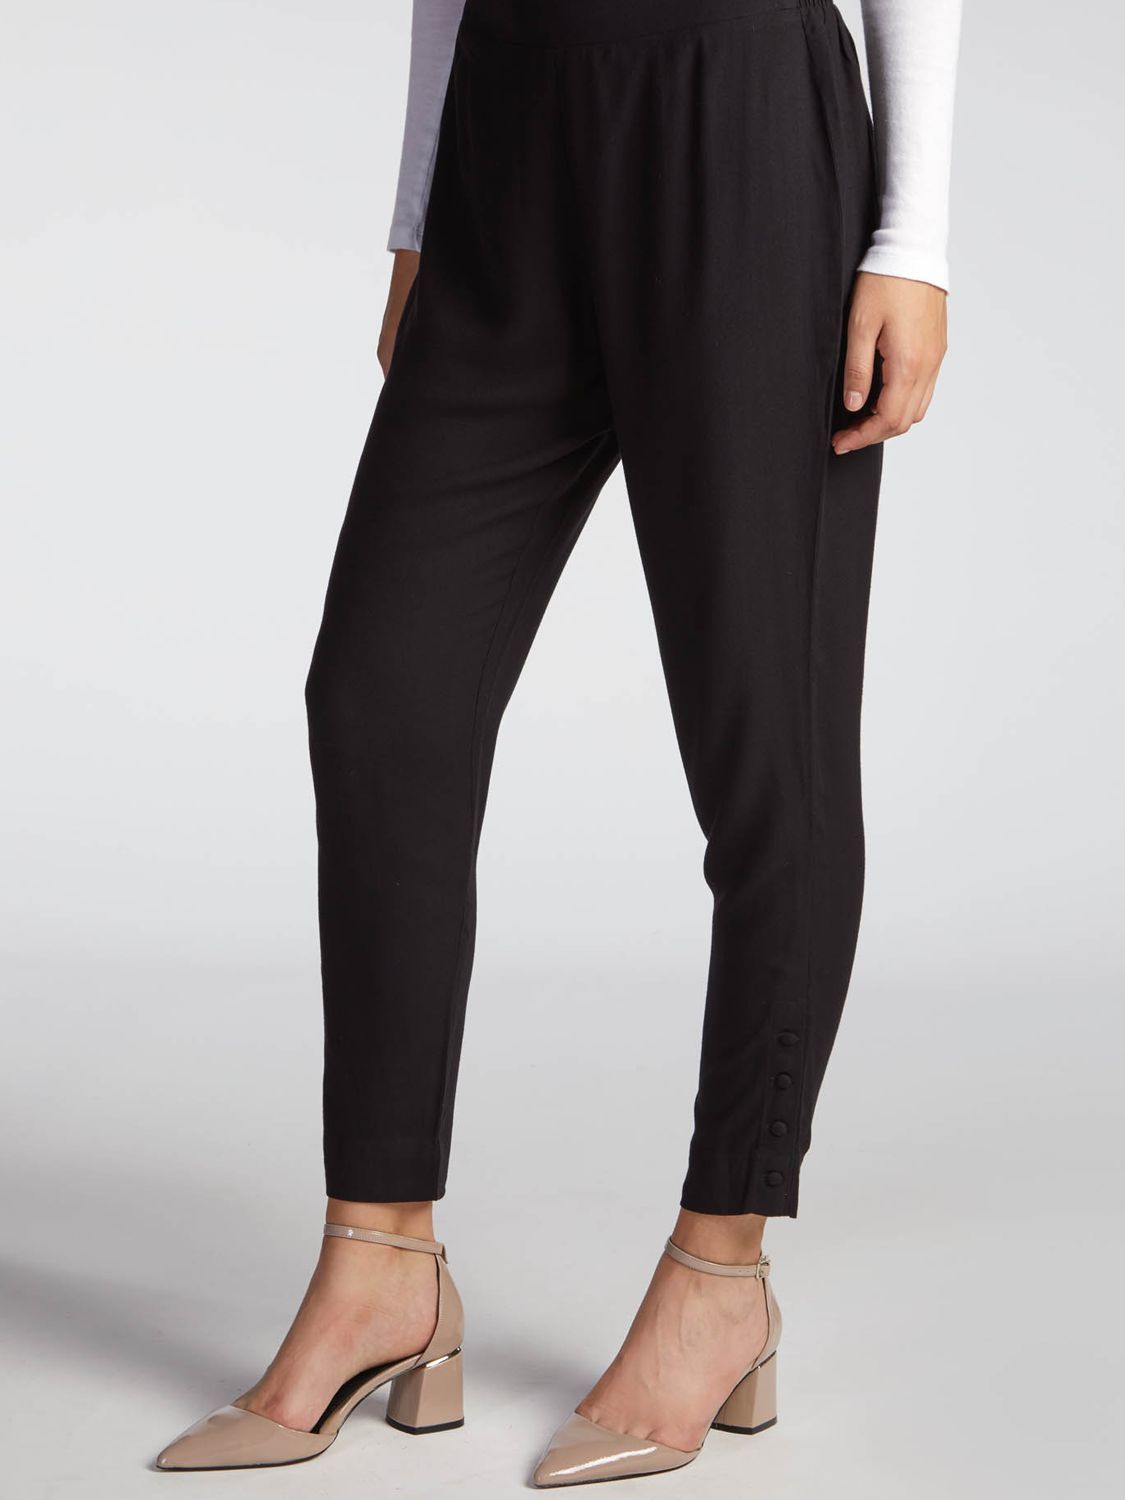 Aab Crepe Button Trousers, Black at John Lewis & Partners